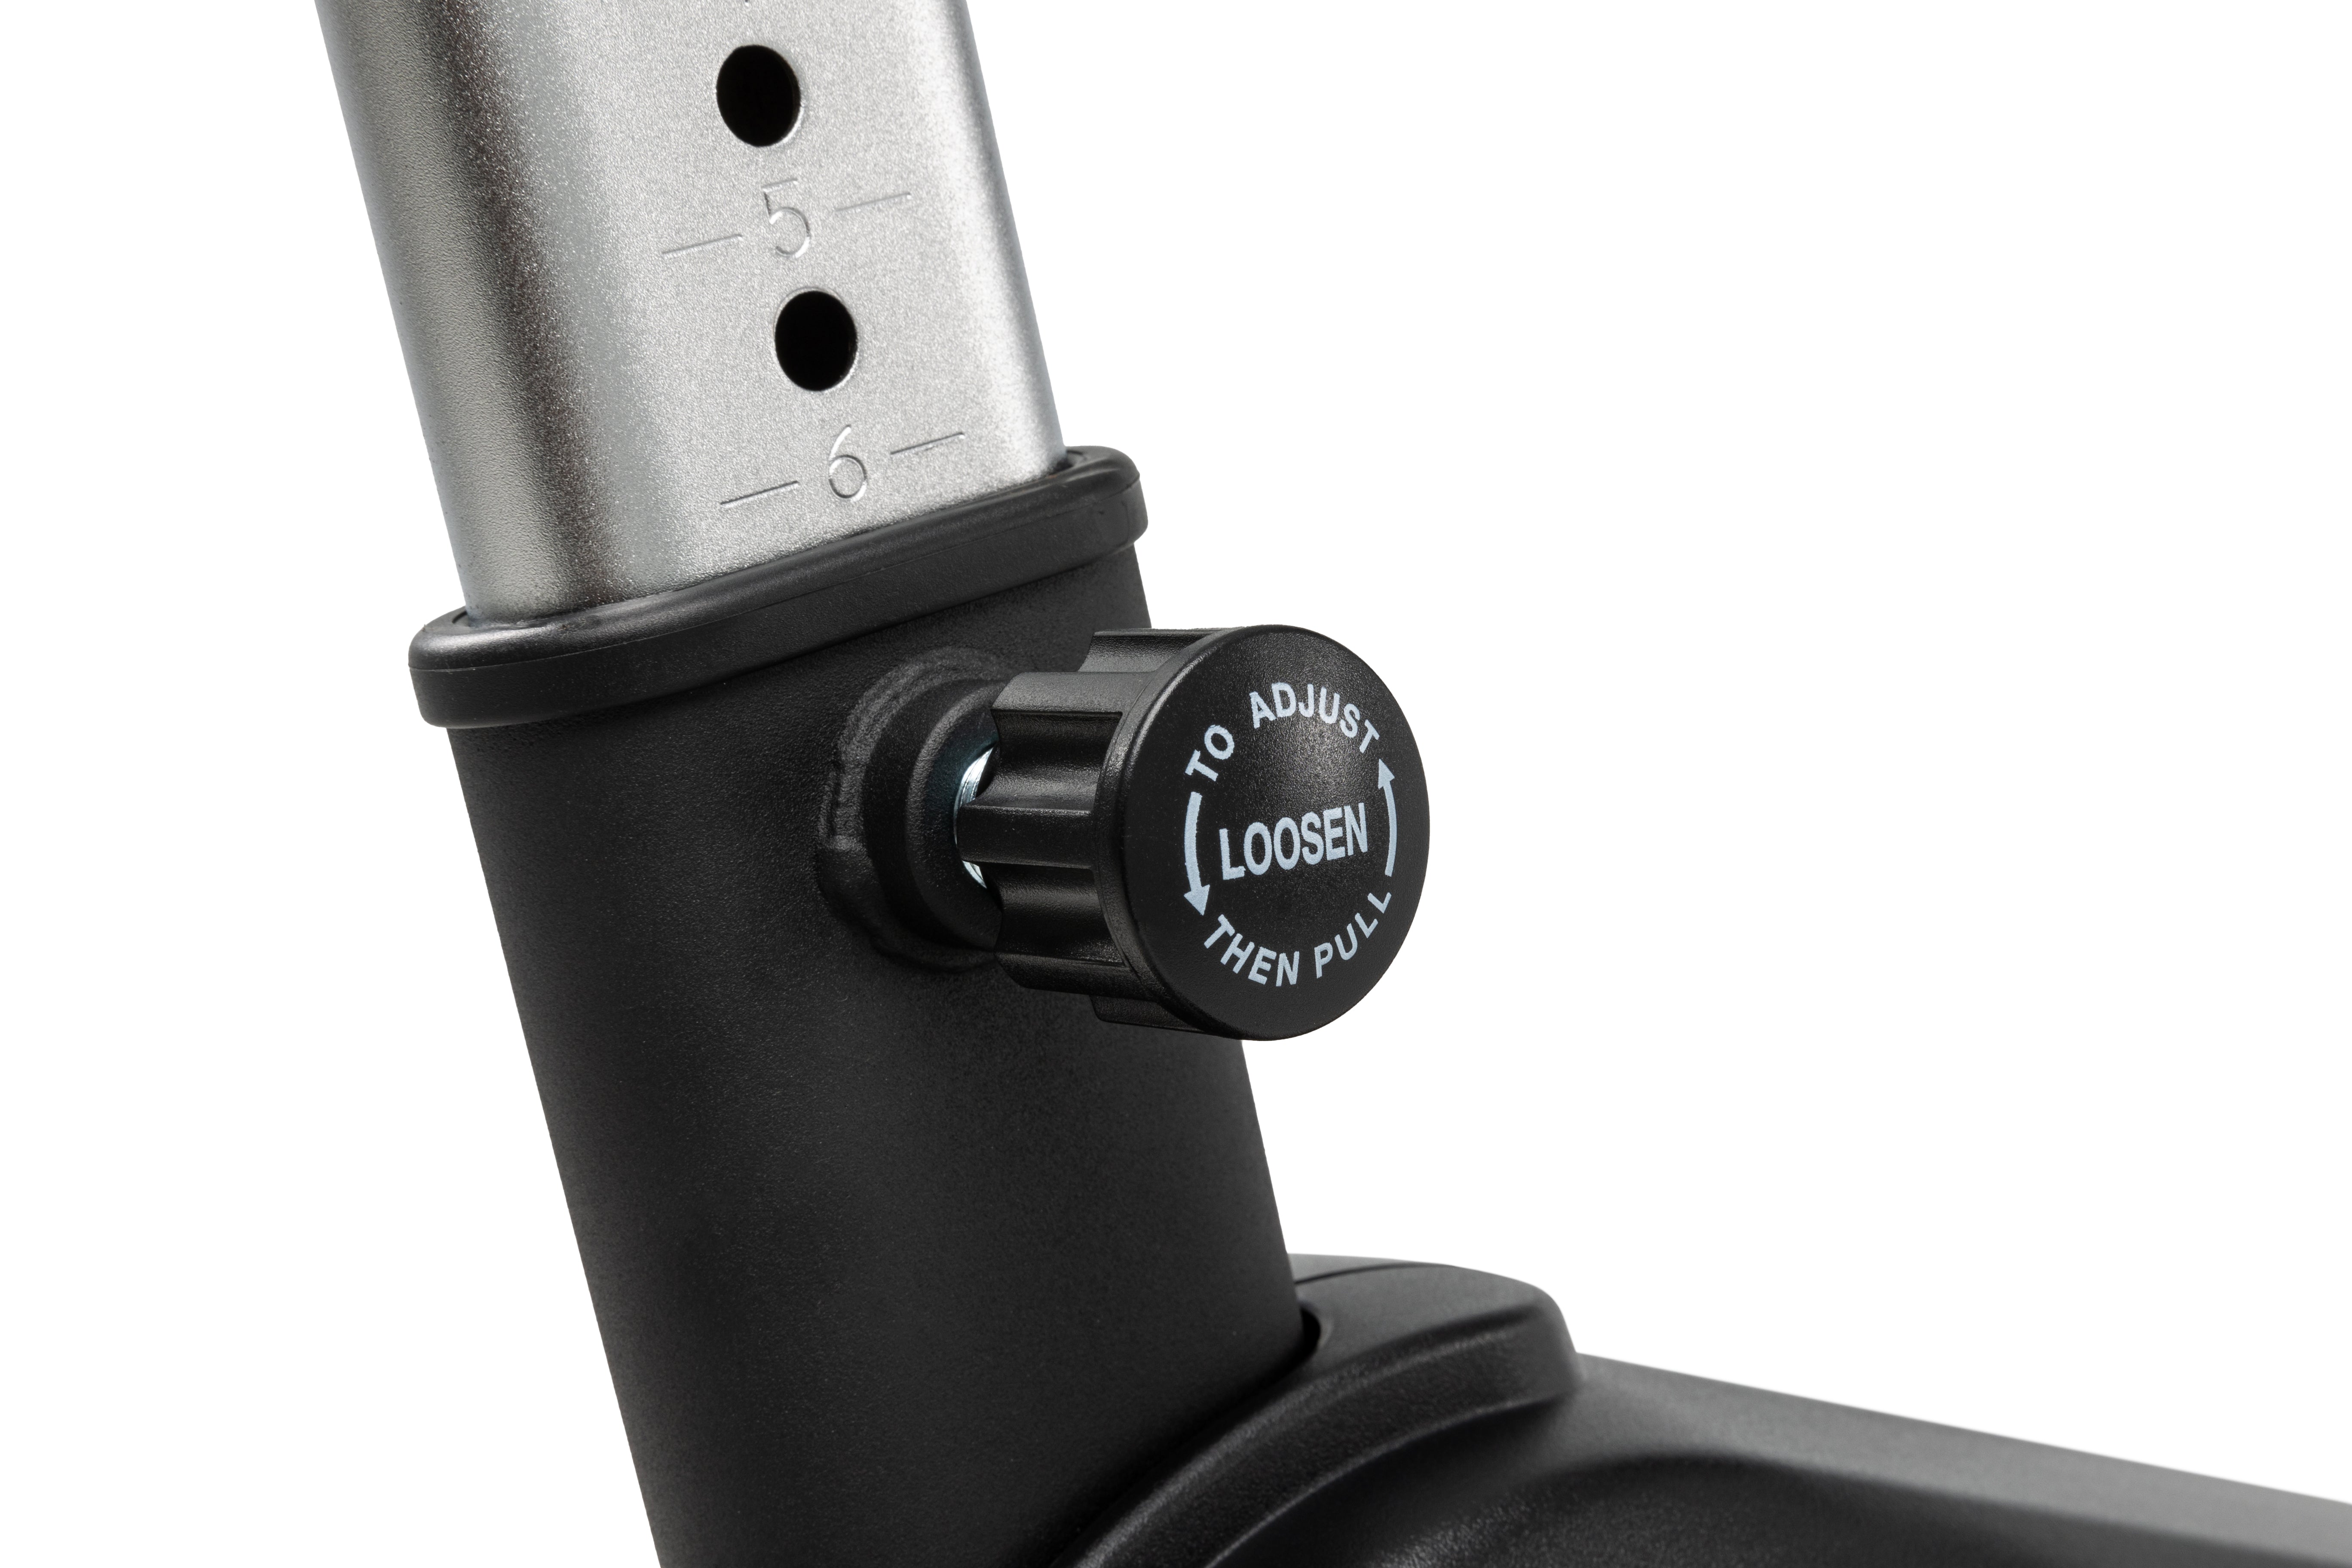 Detail of the Sole B94 exercise machine's adjustable height mechanism, showing a metallic column with numbered holes '5' and '6', and a black knob labeled 'TO ADJUST LOOSEN THEN PULL' on a matte black base.